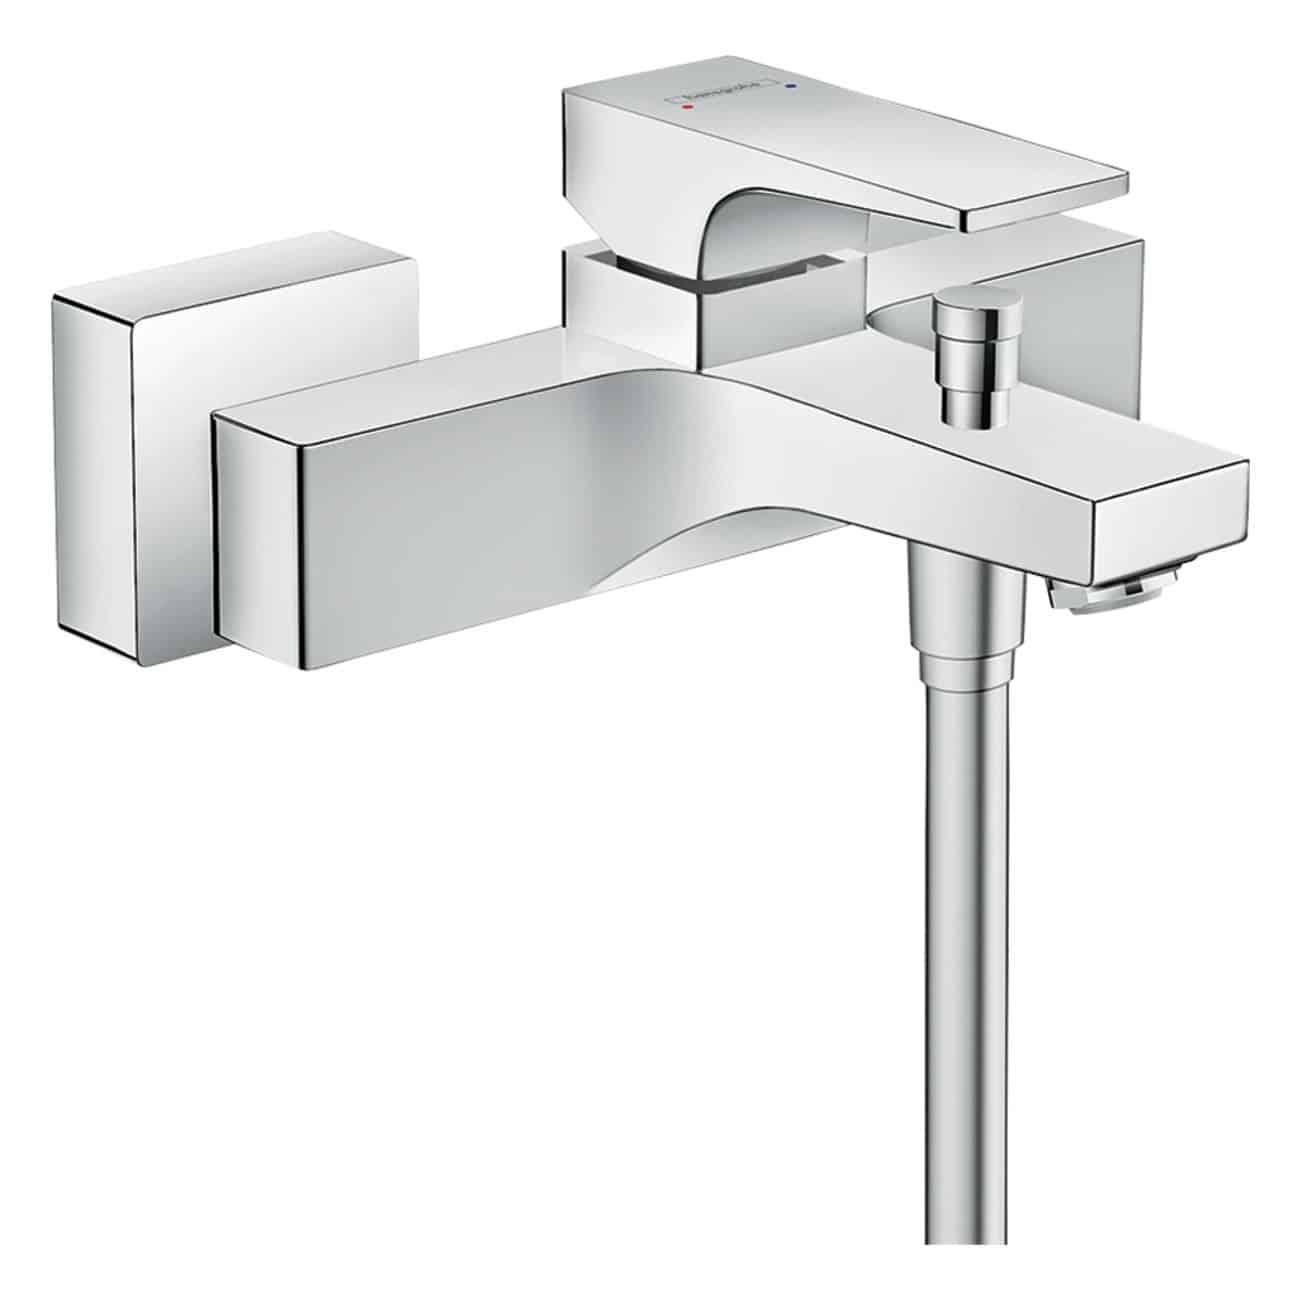 Metropol 浴室單把手浴缸龍頭 Bathroom Single Lever Bath Mixer With Lever Handle-hansgrohe-32540000-Home Manner